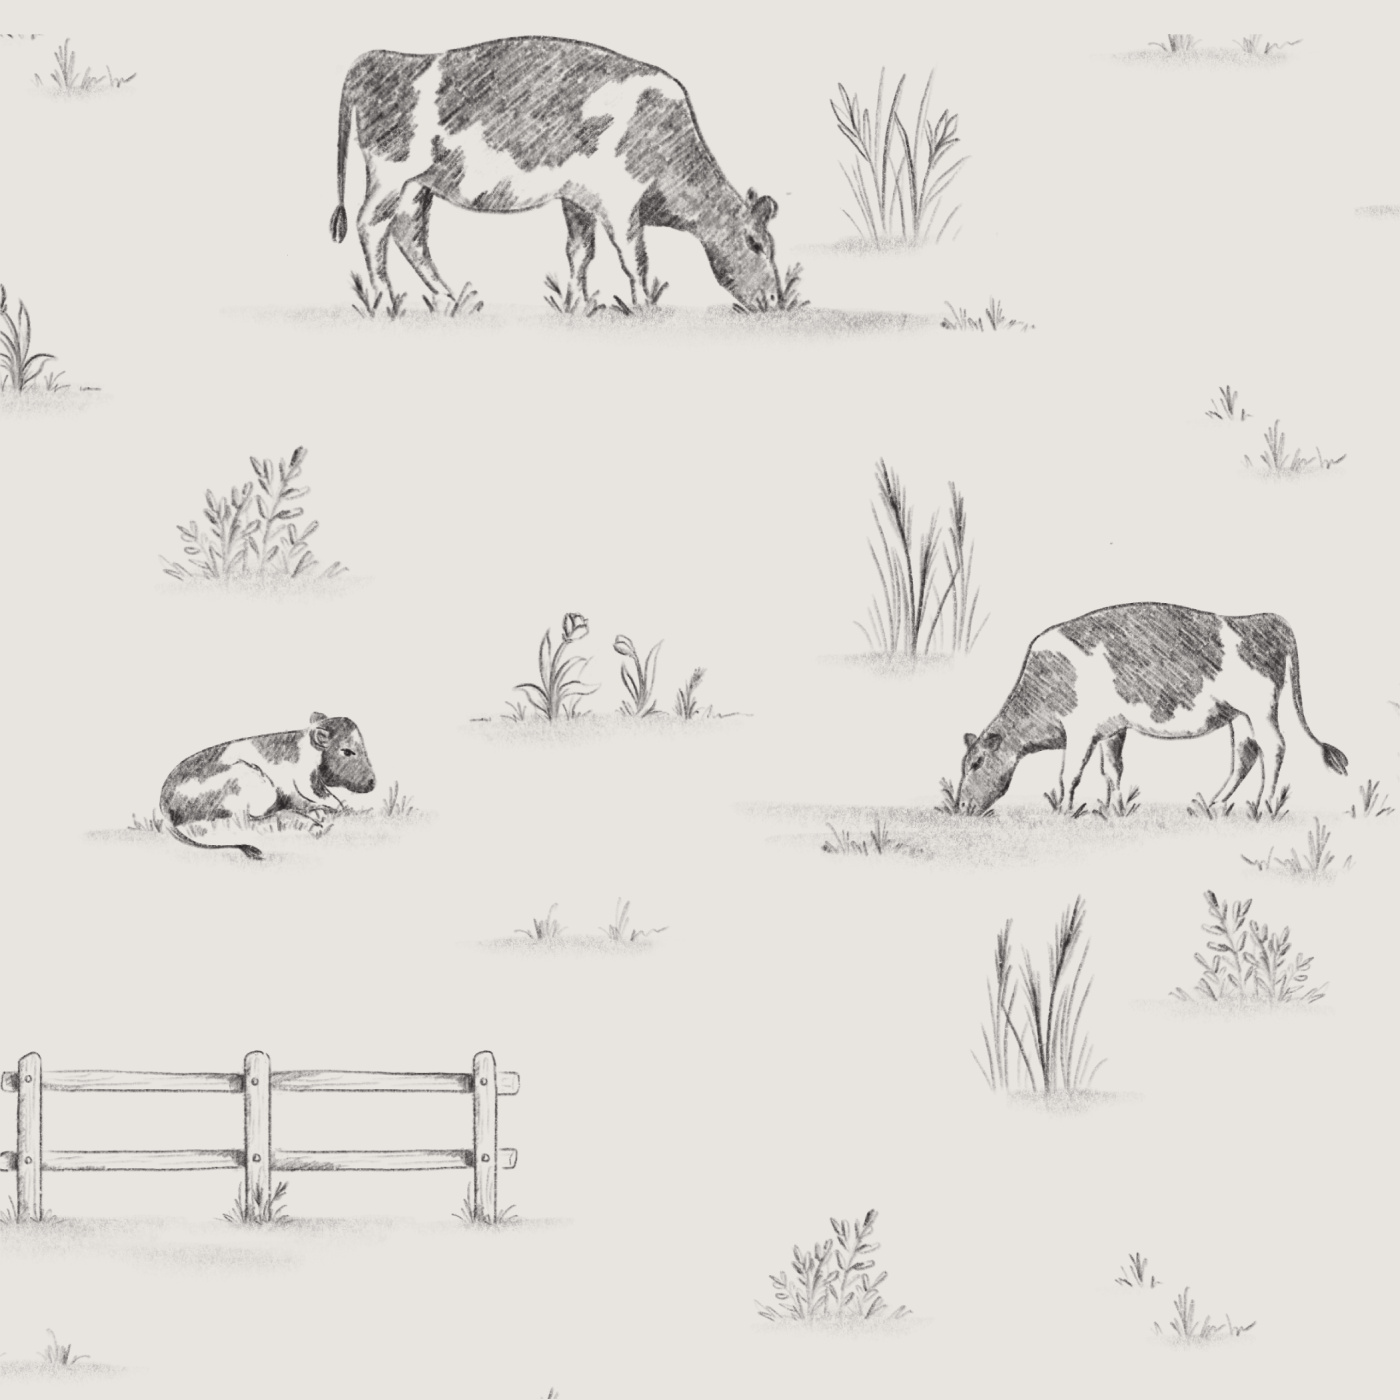 Classic Cow Peel and Stick Removable Wallpaper